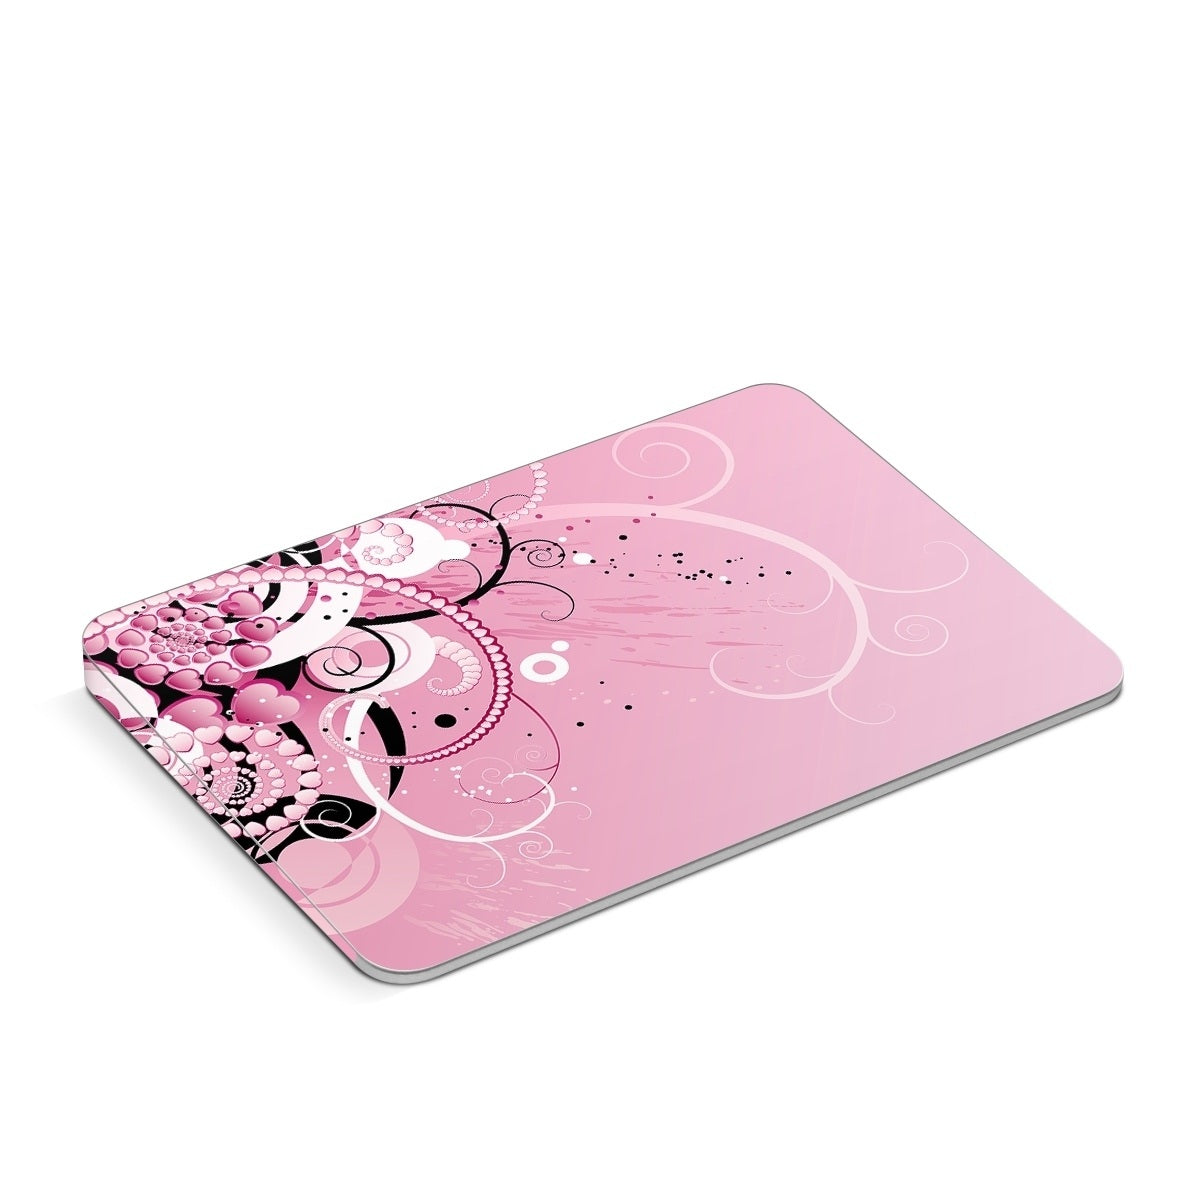 Her Abstraction - Apple Magic Trackpad Skin